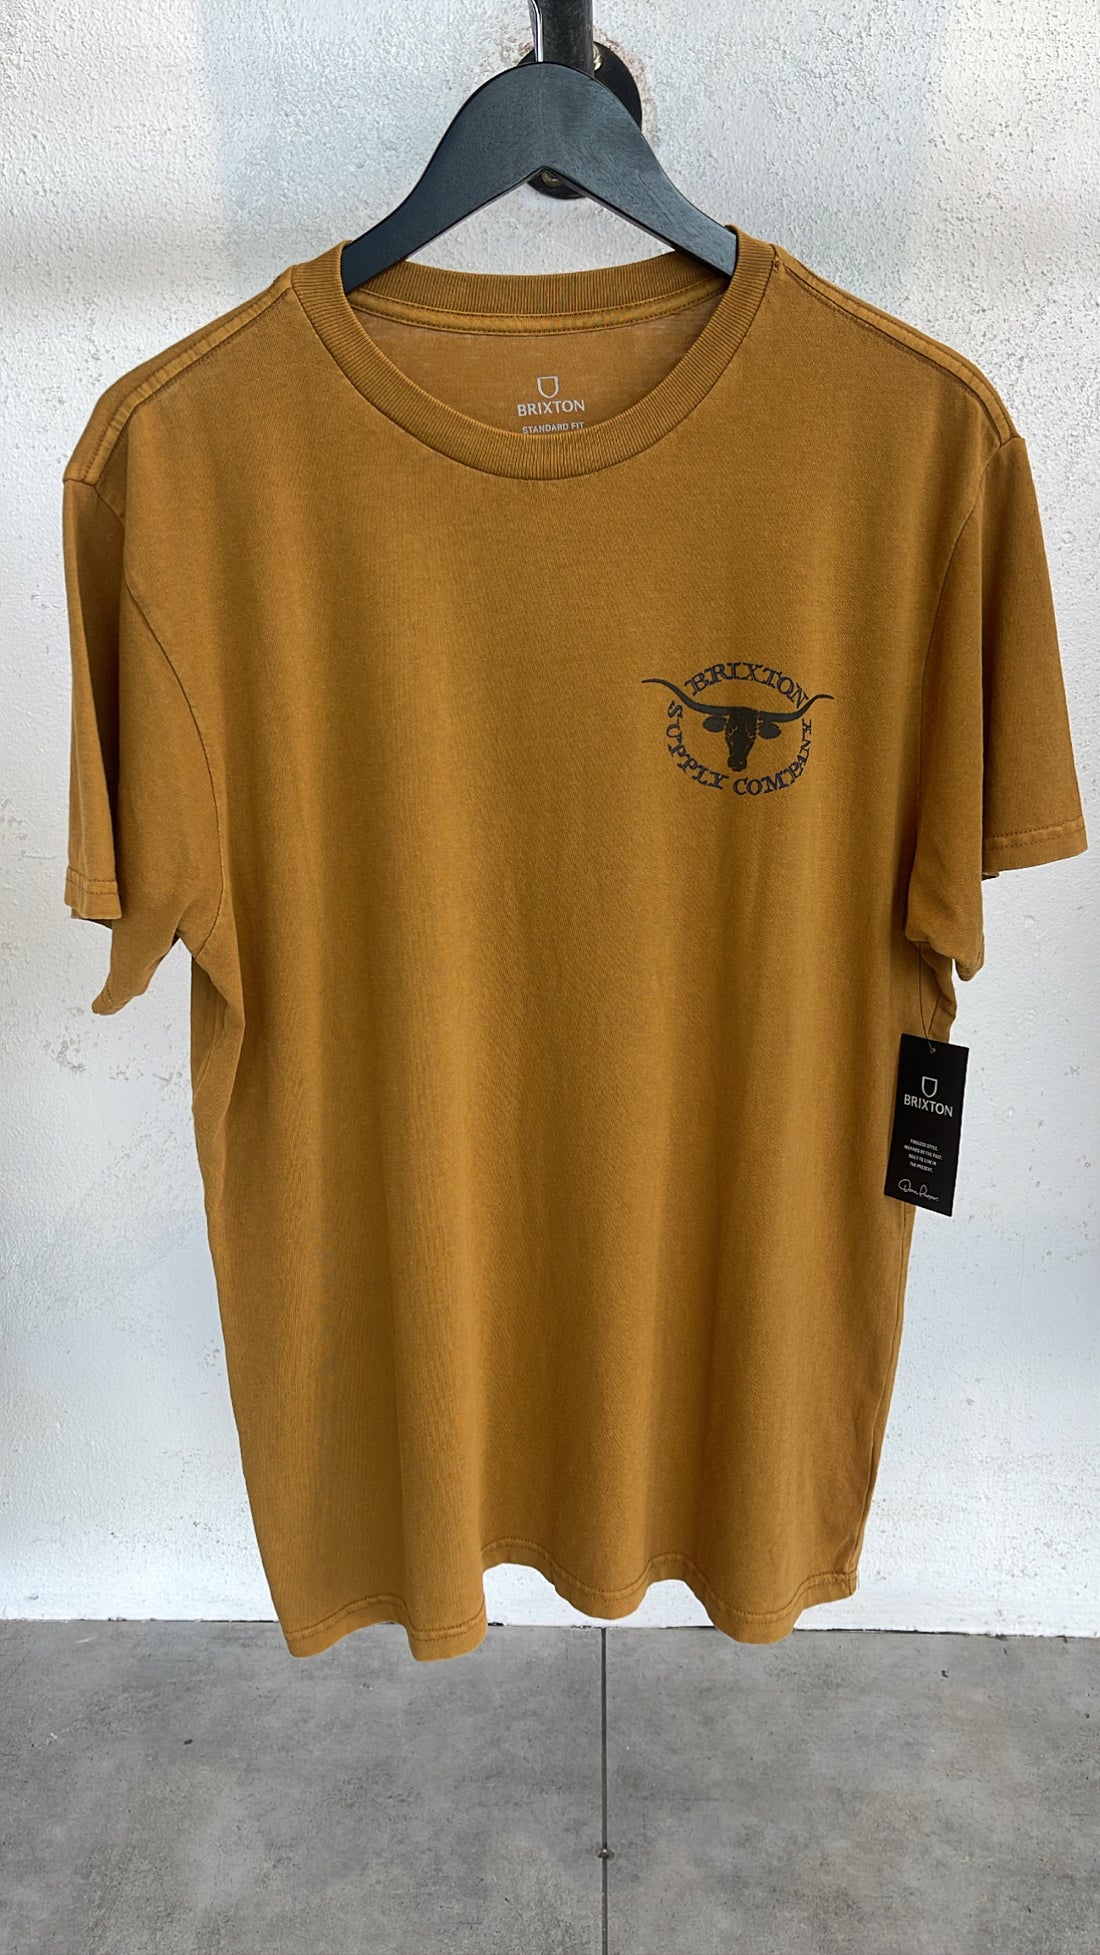 Brixton - Boswell S/S Tee in Golden Brown Worn Wash